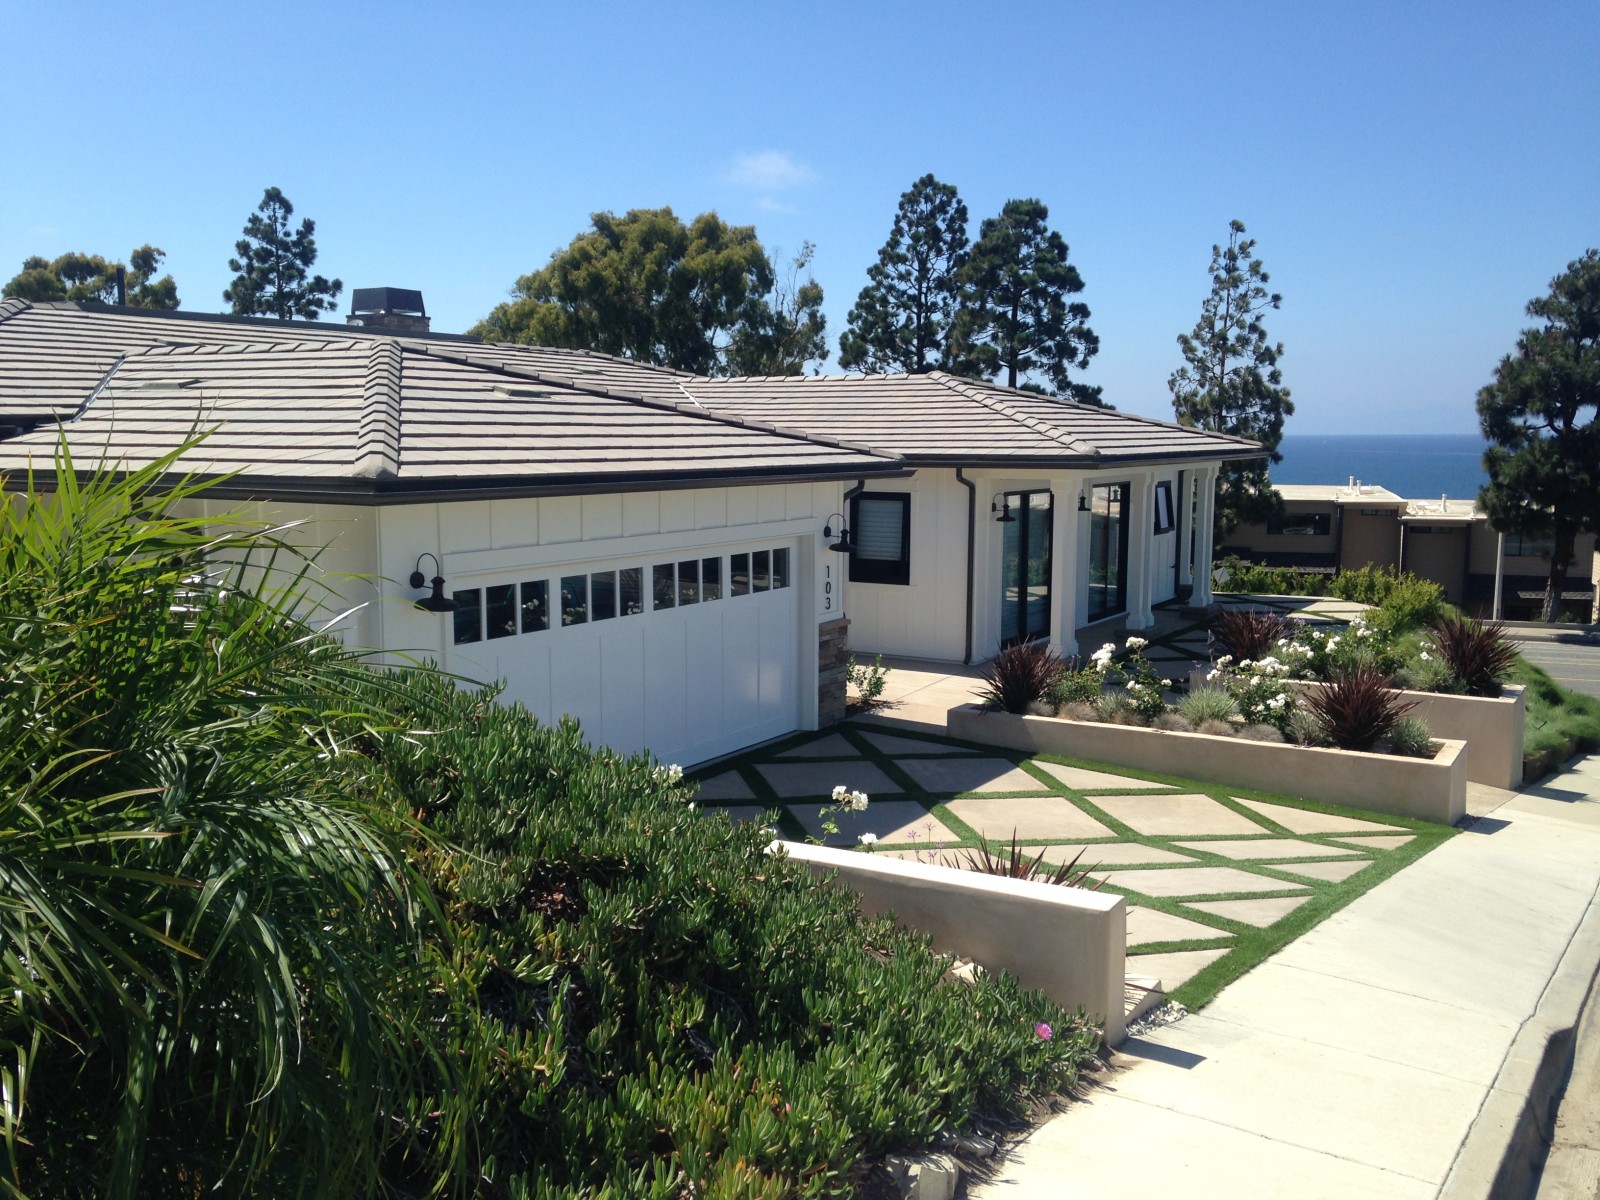 Hollywood Riviera - Redondo Beach Real Estate and Homes for Sale1600 x 1200